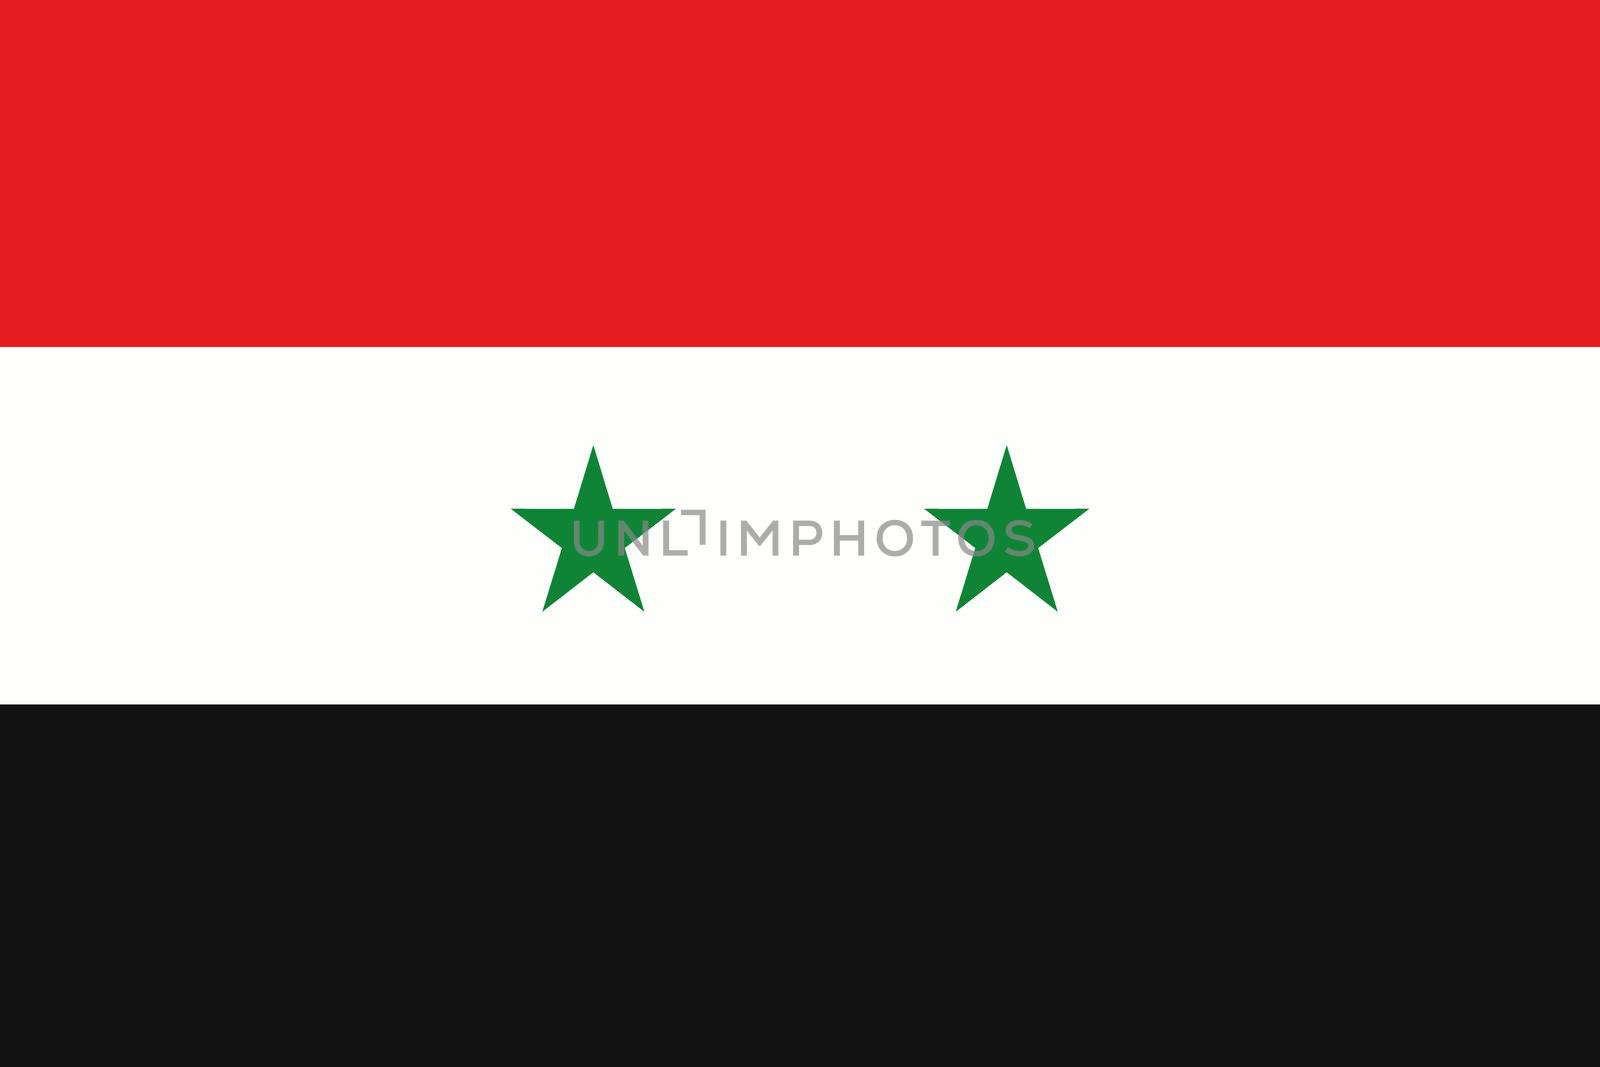 An illustration of the flag of Syria